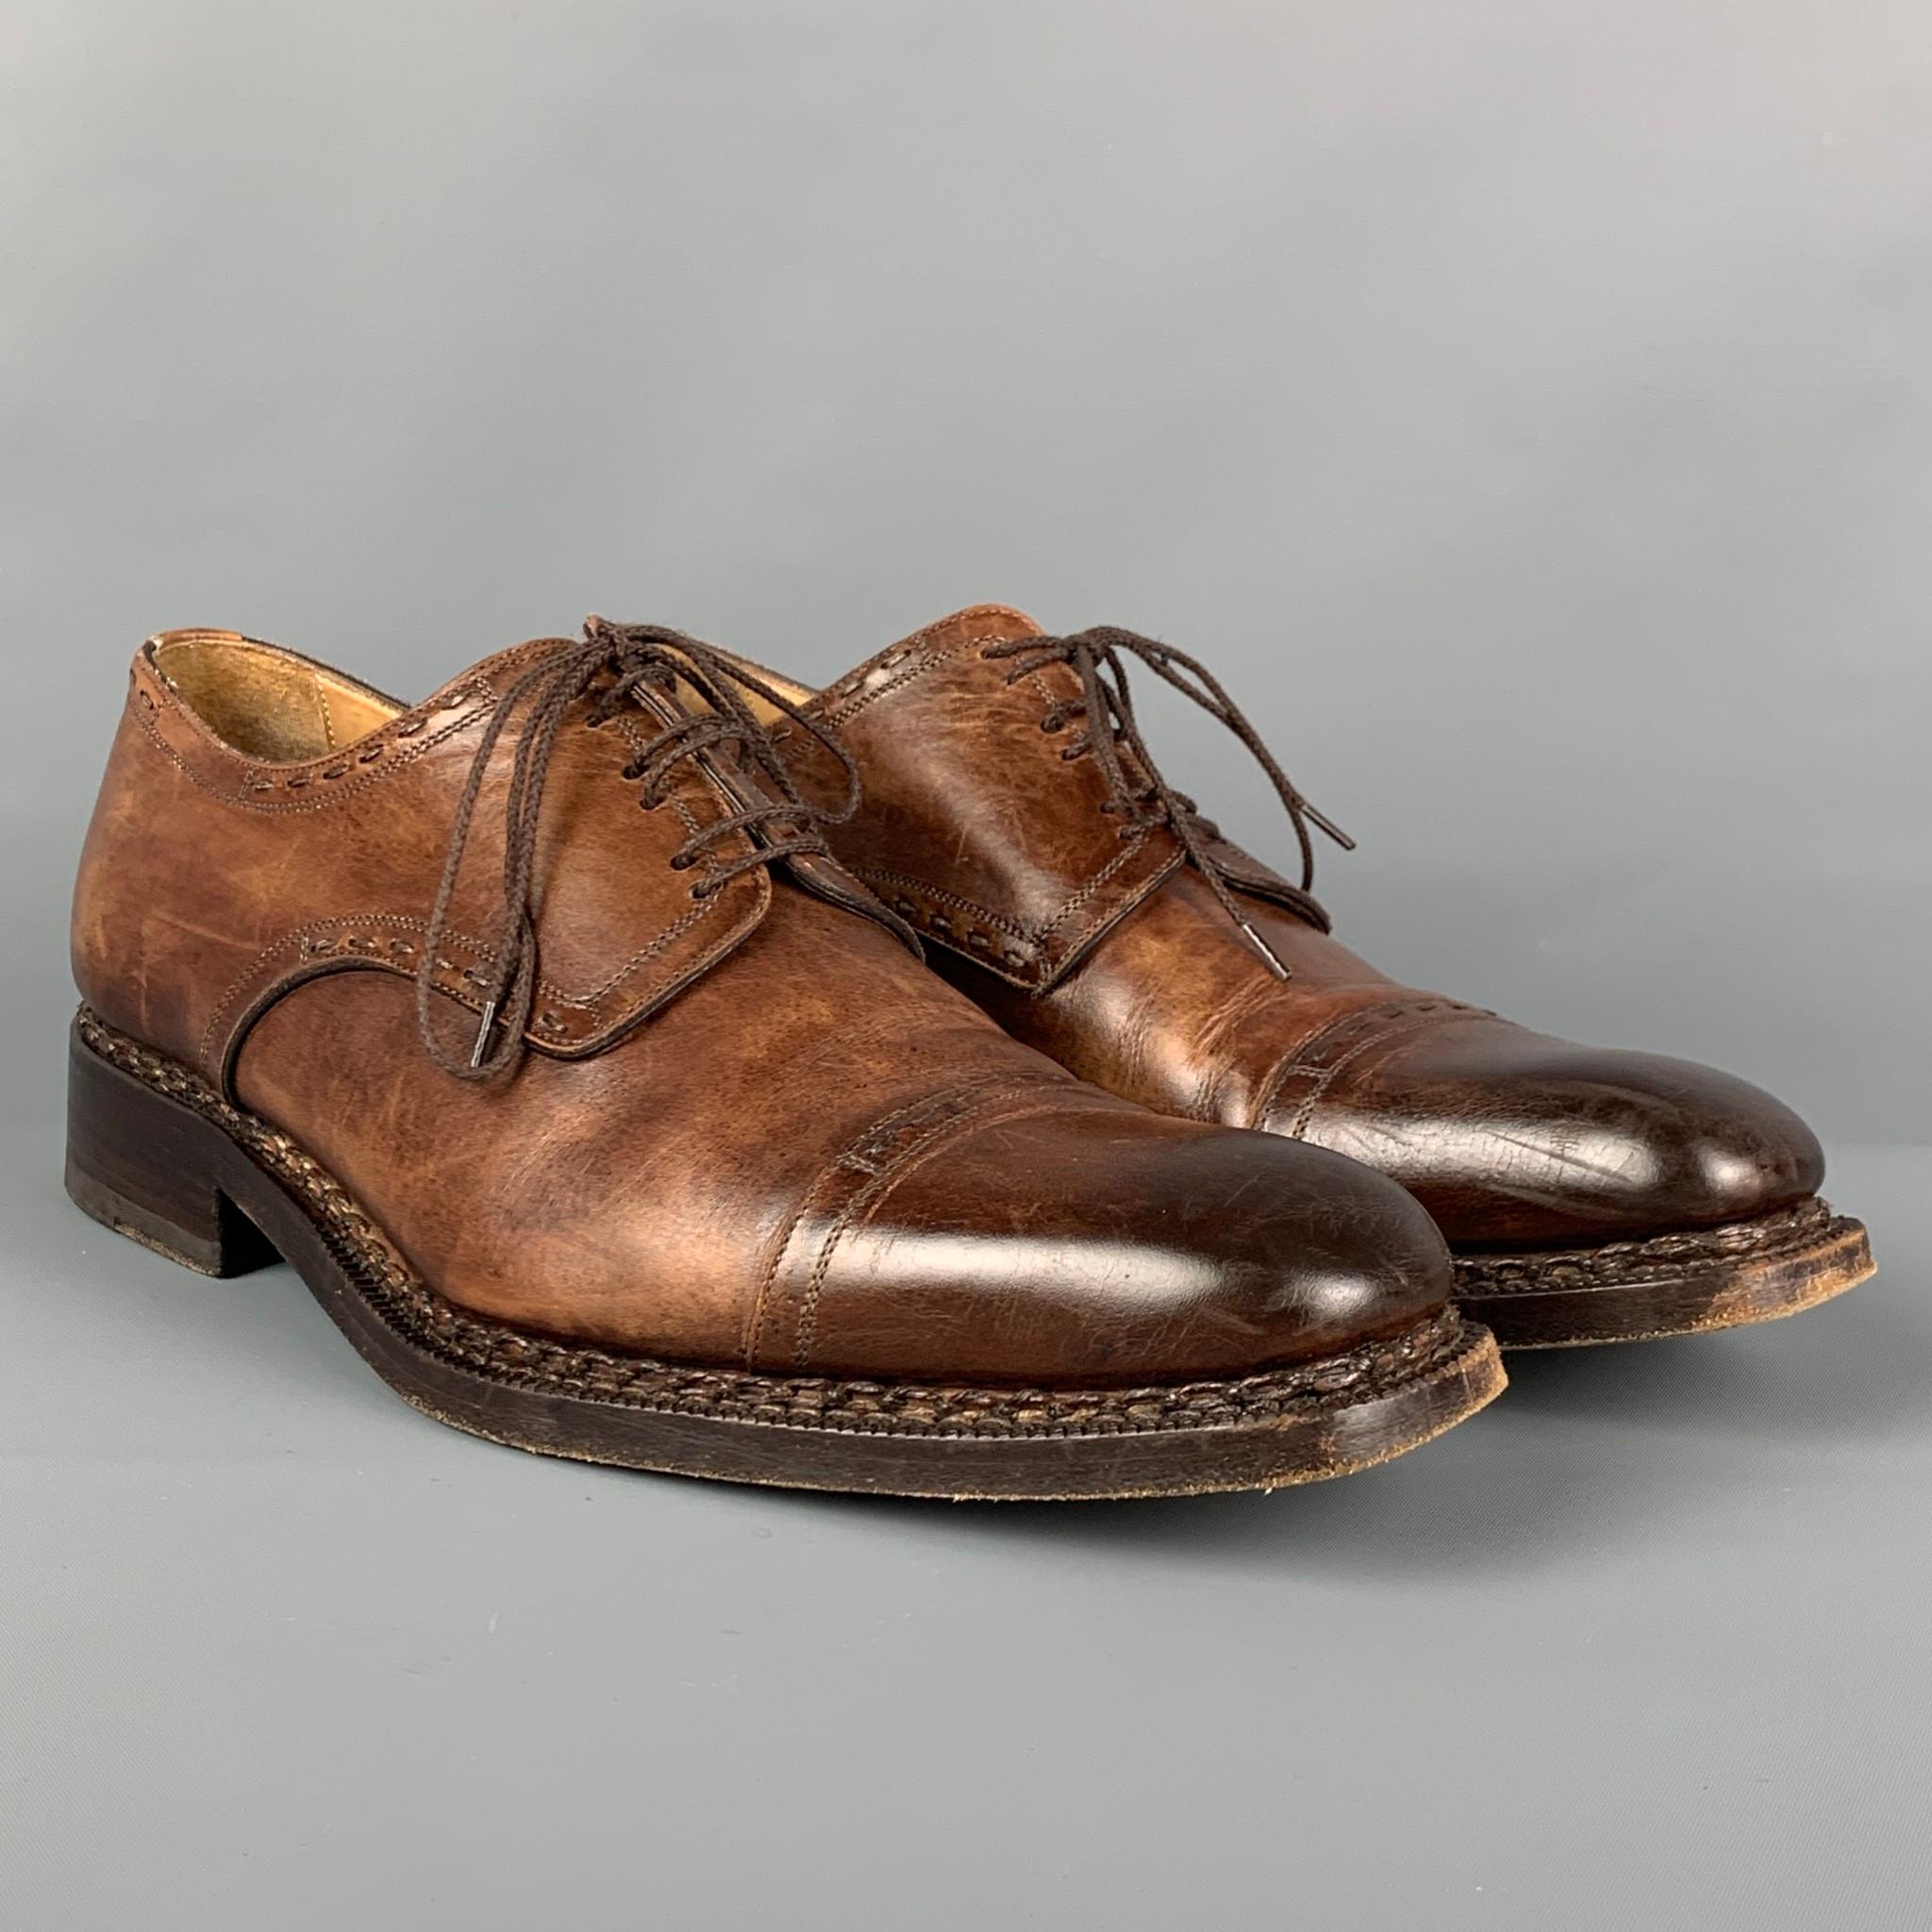 CALZOLERIA HARRIS x BARNEYS NEW YORK lace up shoes comes in a brown distressed leather featuring a cap toe and a lace up closure. Made in Italy.

Very Good Pre-Owned Condition.
Marked: 9916 8.5

Outsole: 12.25 in. x 4.25 in.